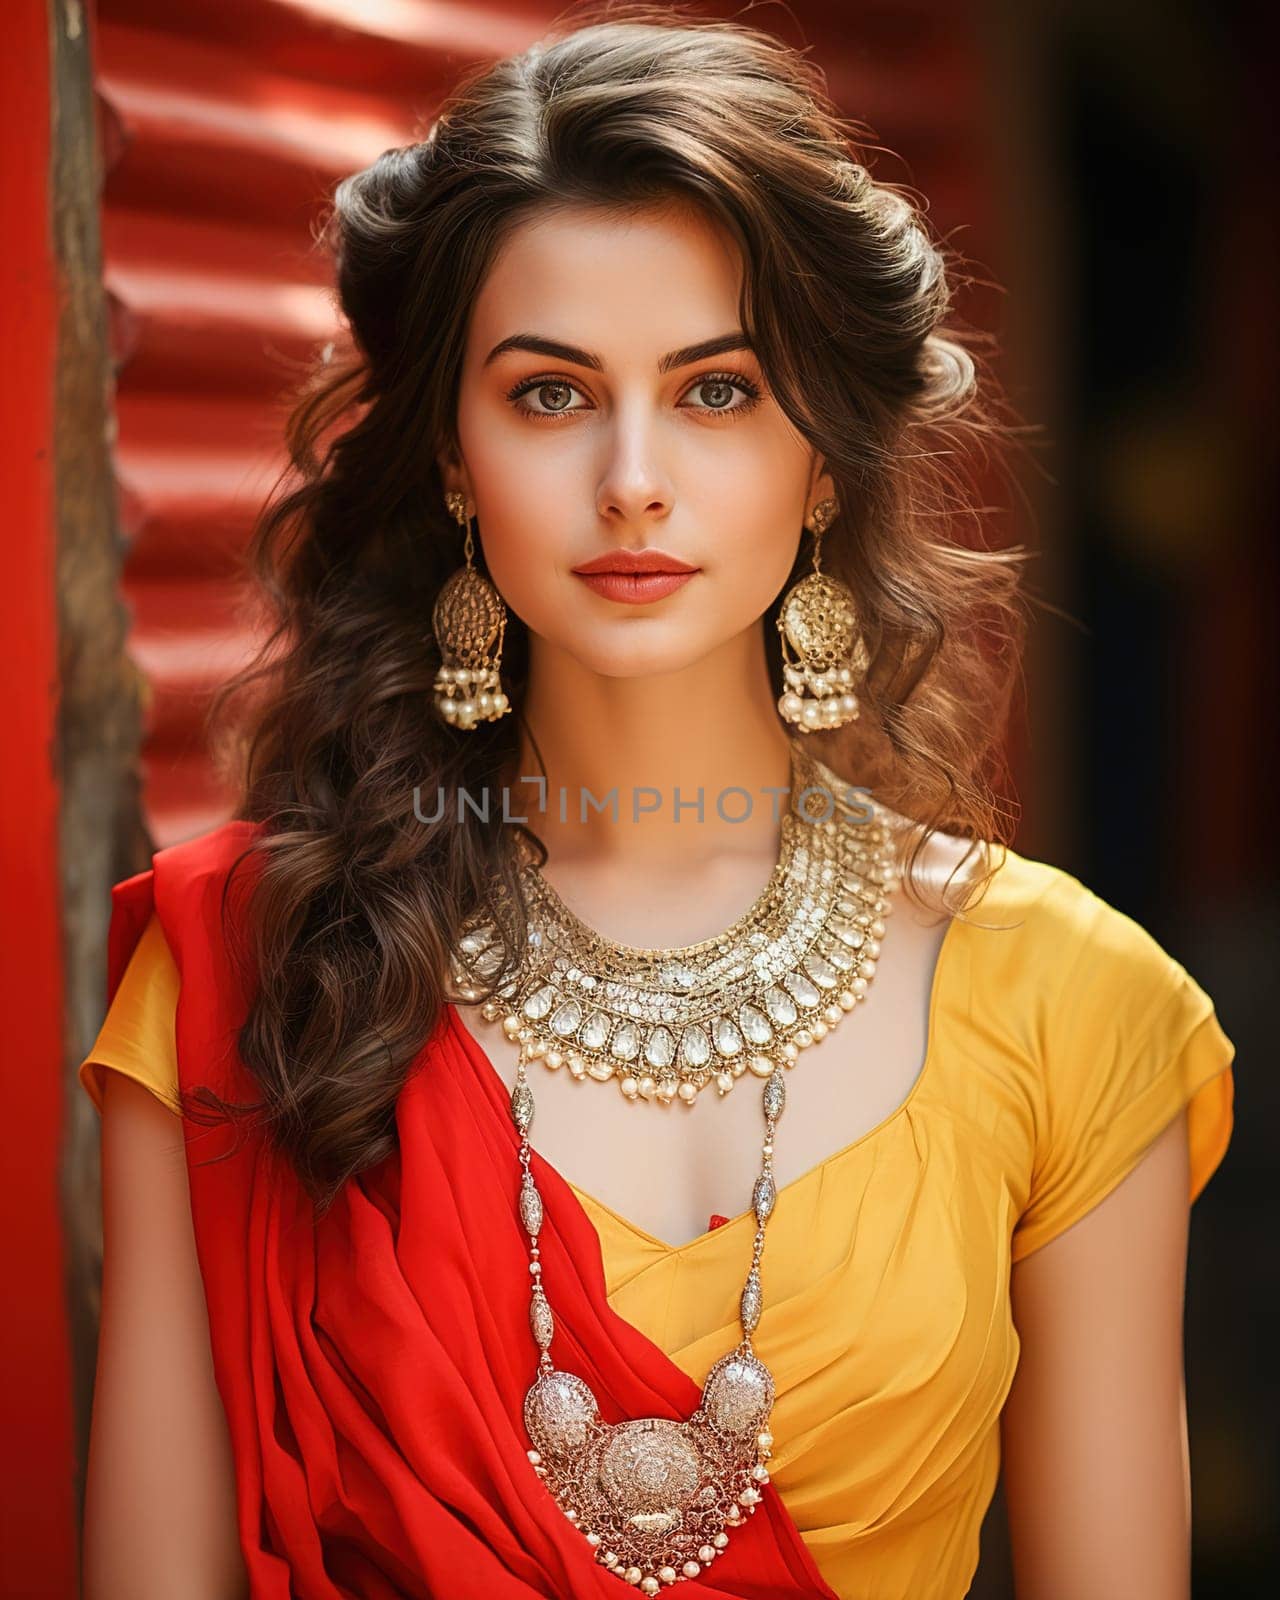 Beautiful Indian woman in red-yellow sari. by Yurich32